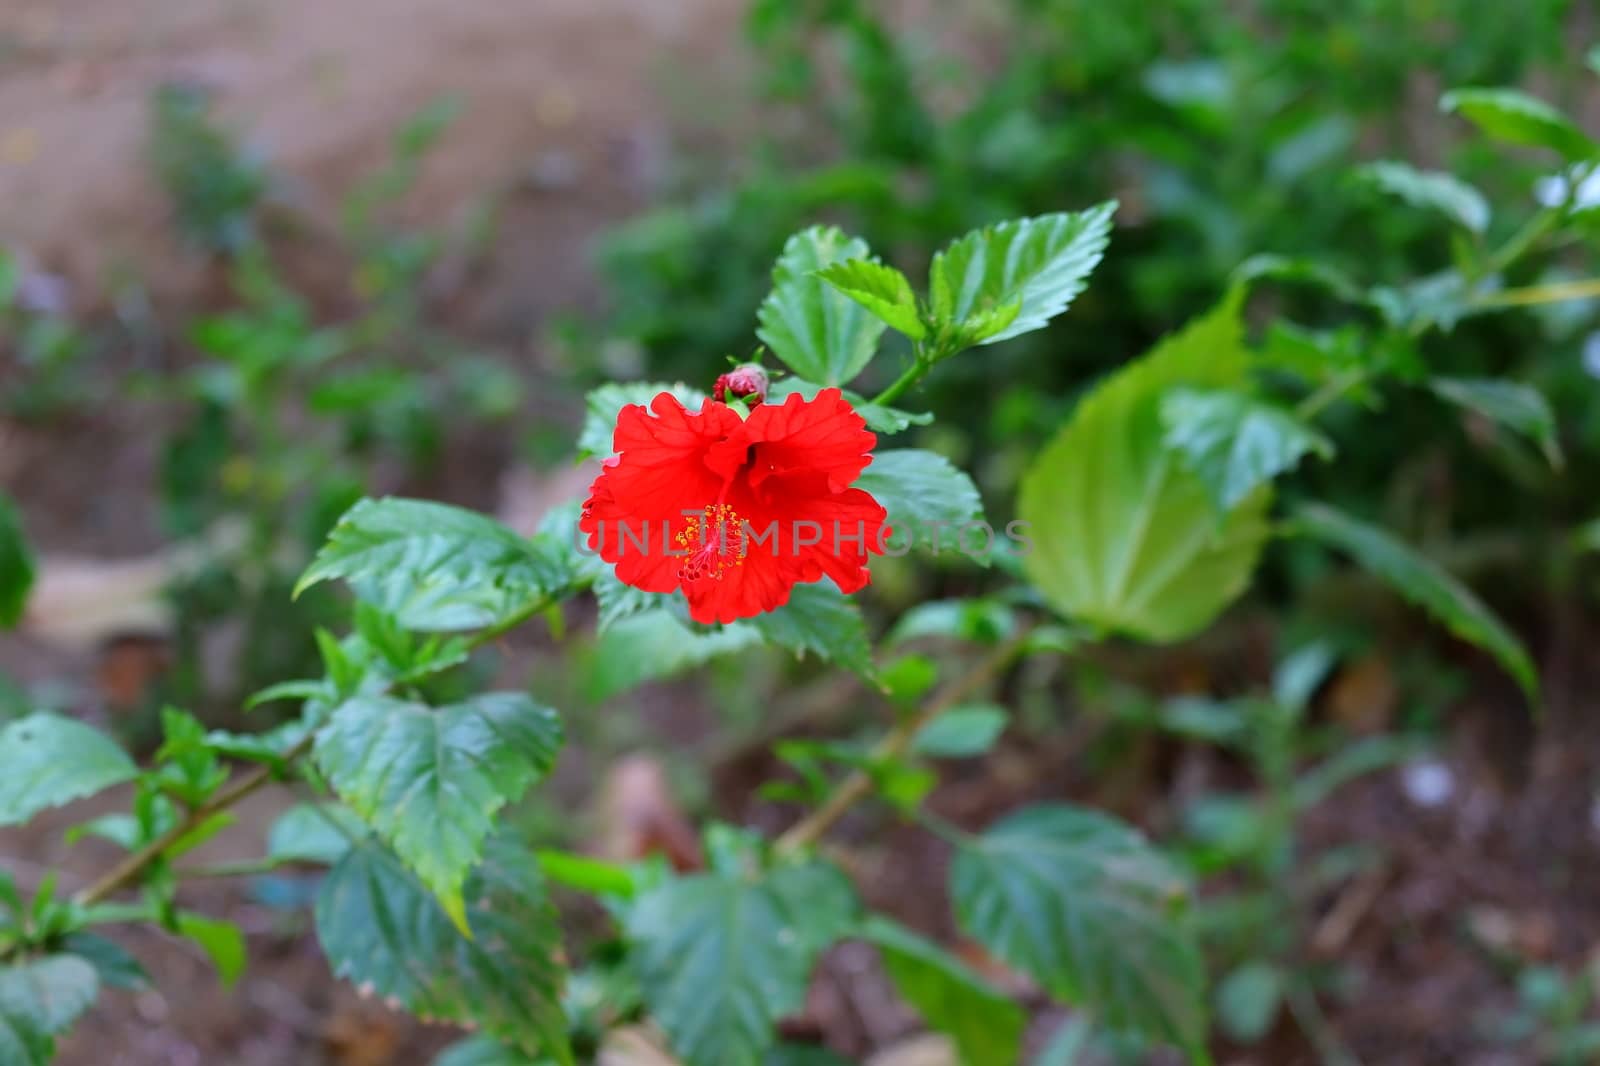 hibiscus flower and blur leaves , hd image by 9500102400